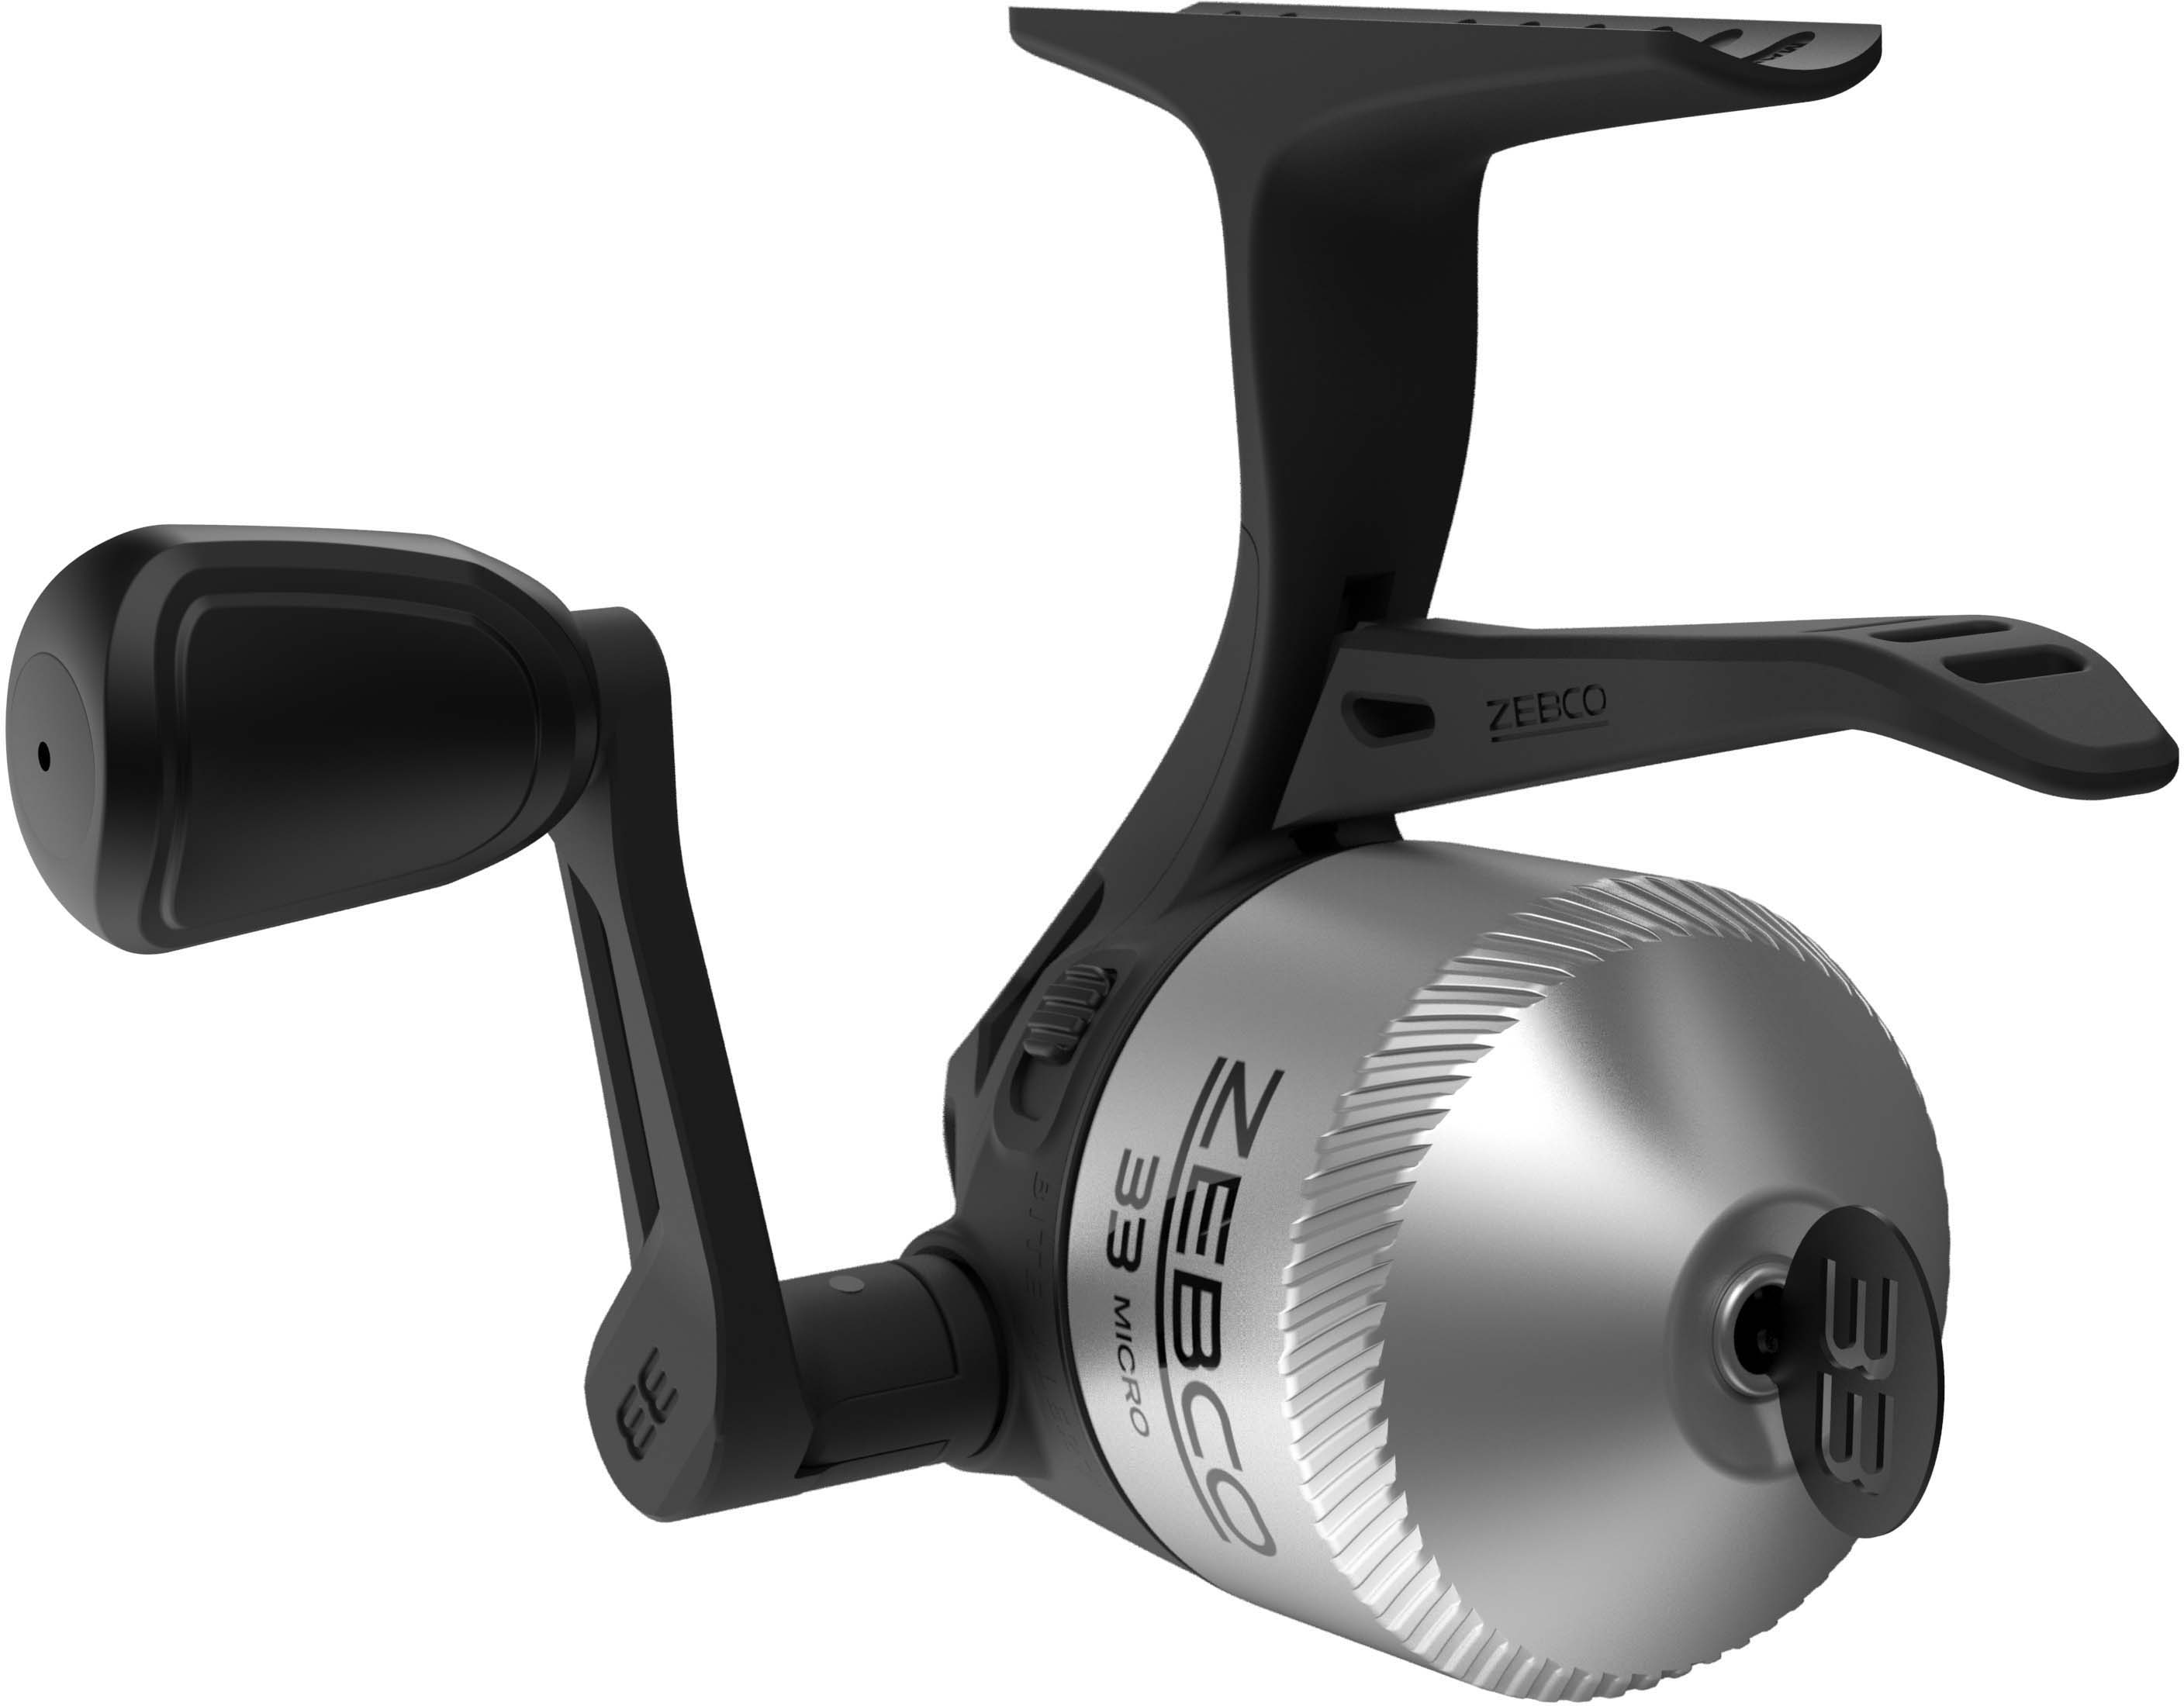 Zebco 33 Micro Triggerspin Reel , Up to $2.10 Off — CampSaver